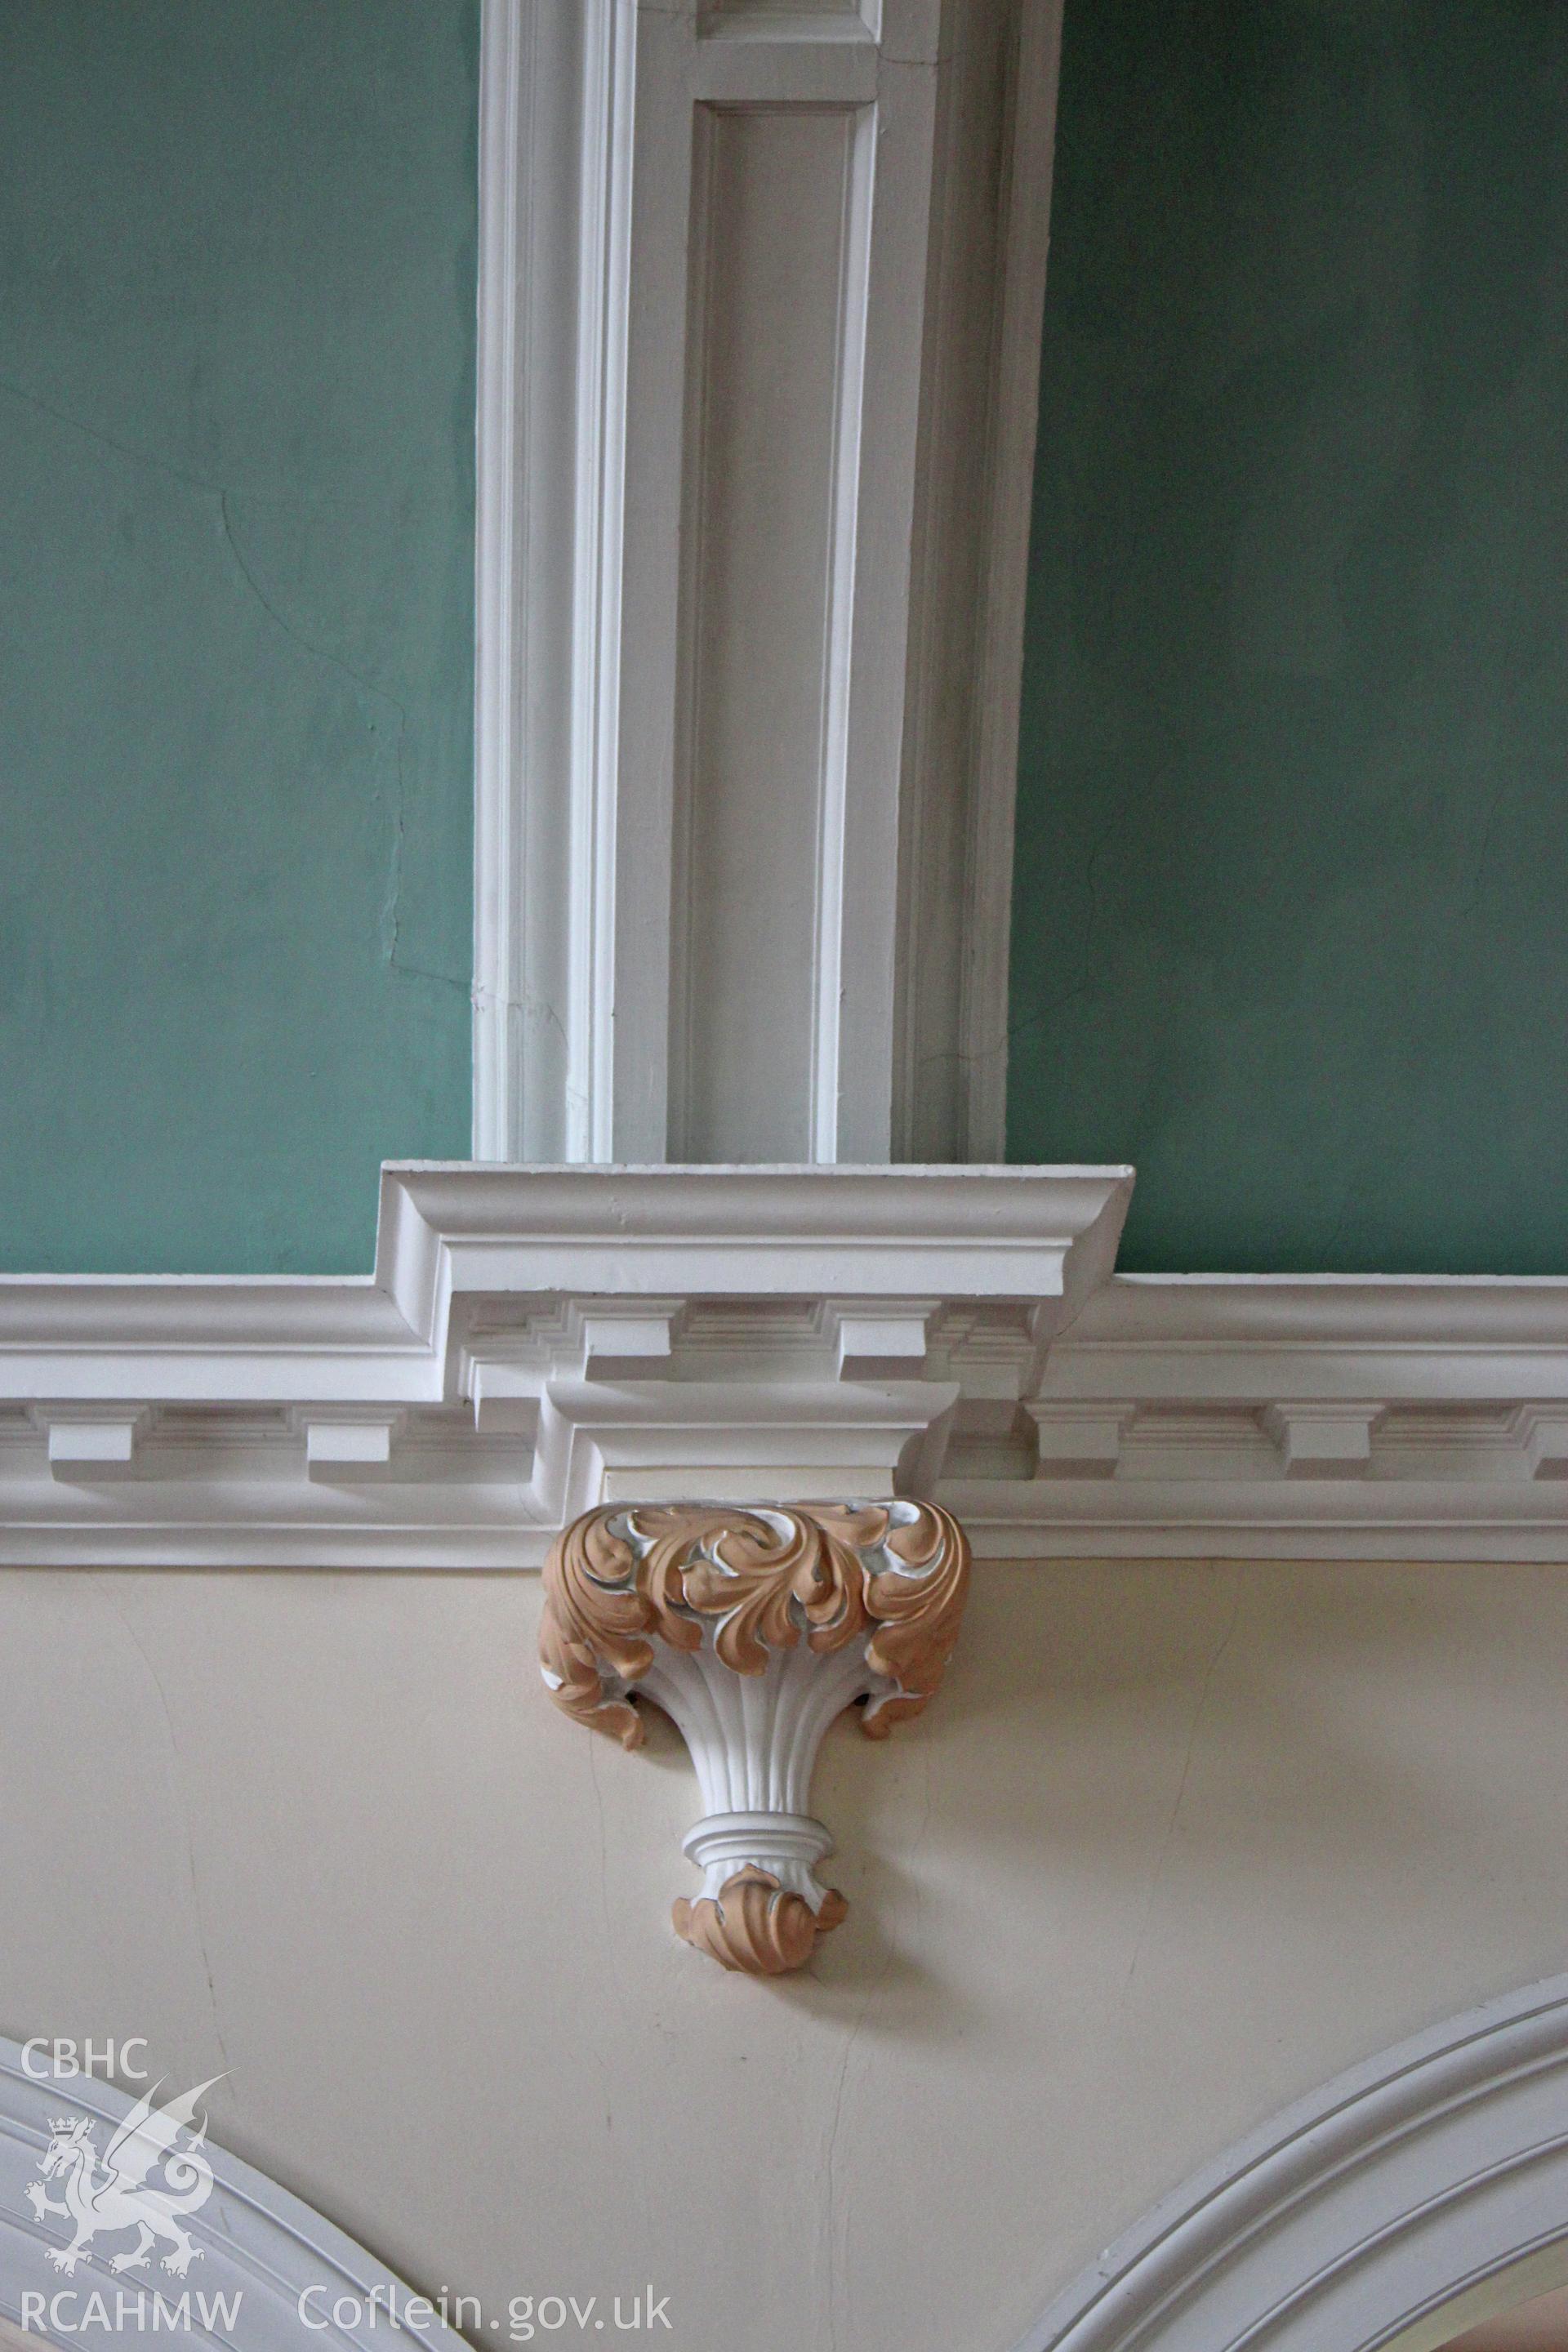 Bethel Independent Chapel, Pen-Clawdd, detail of ceiling corbel.